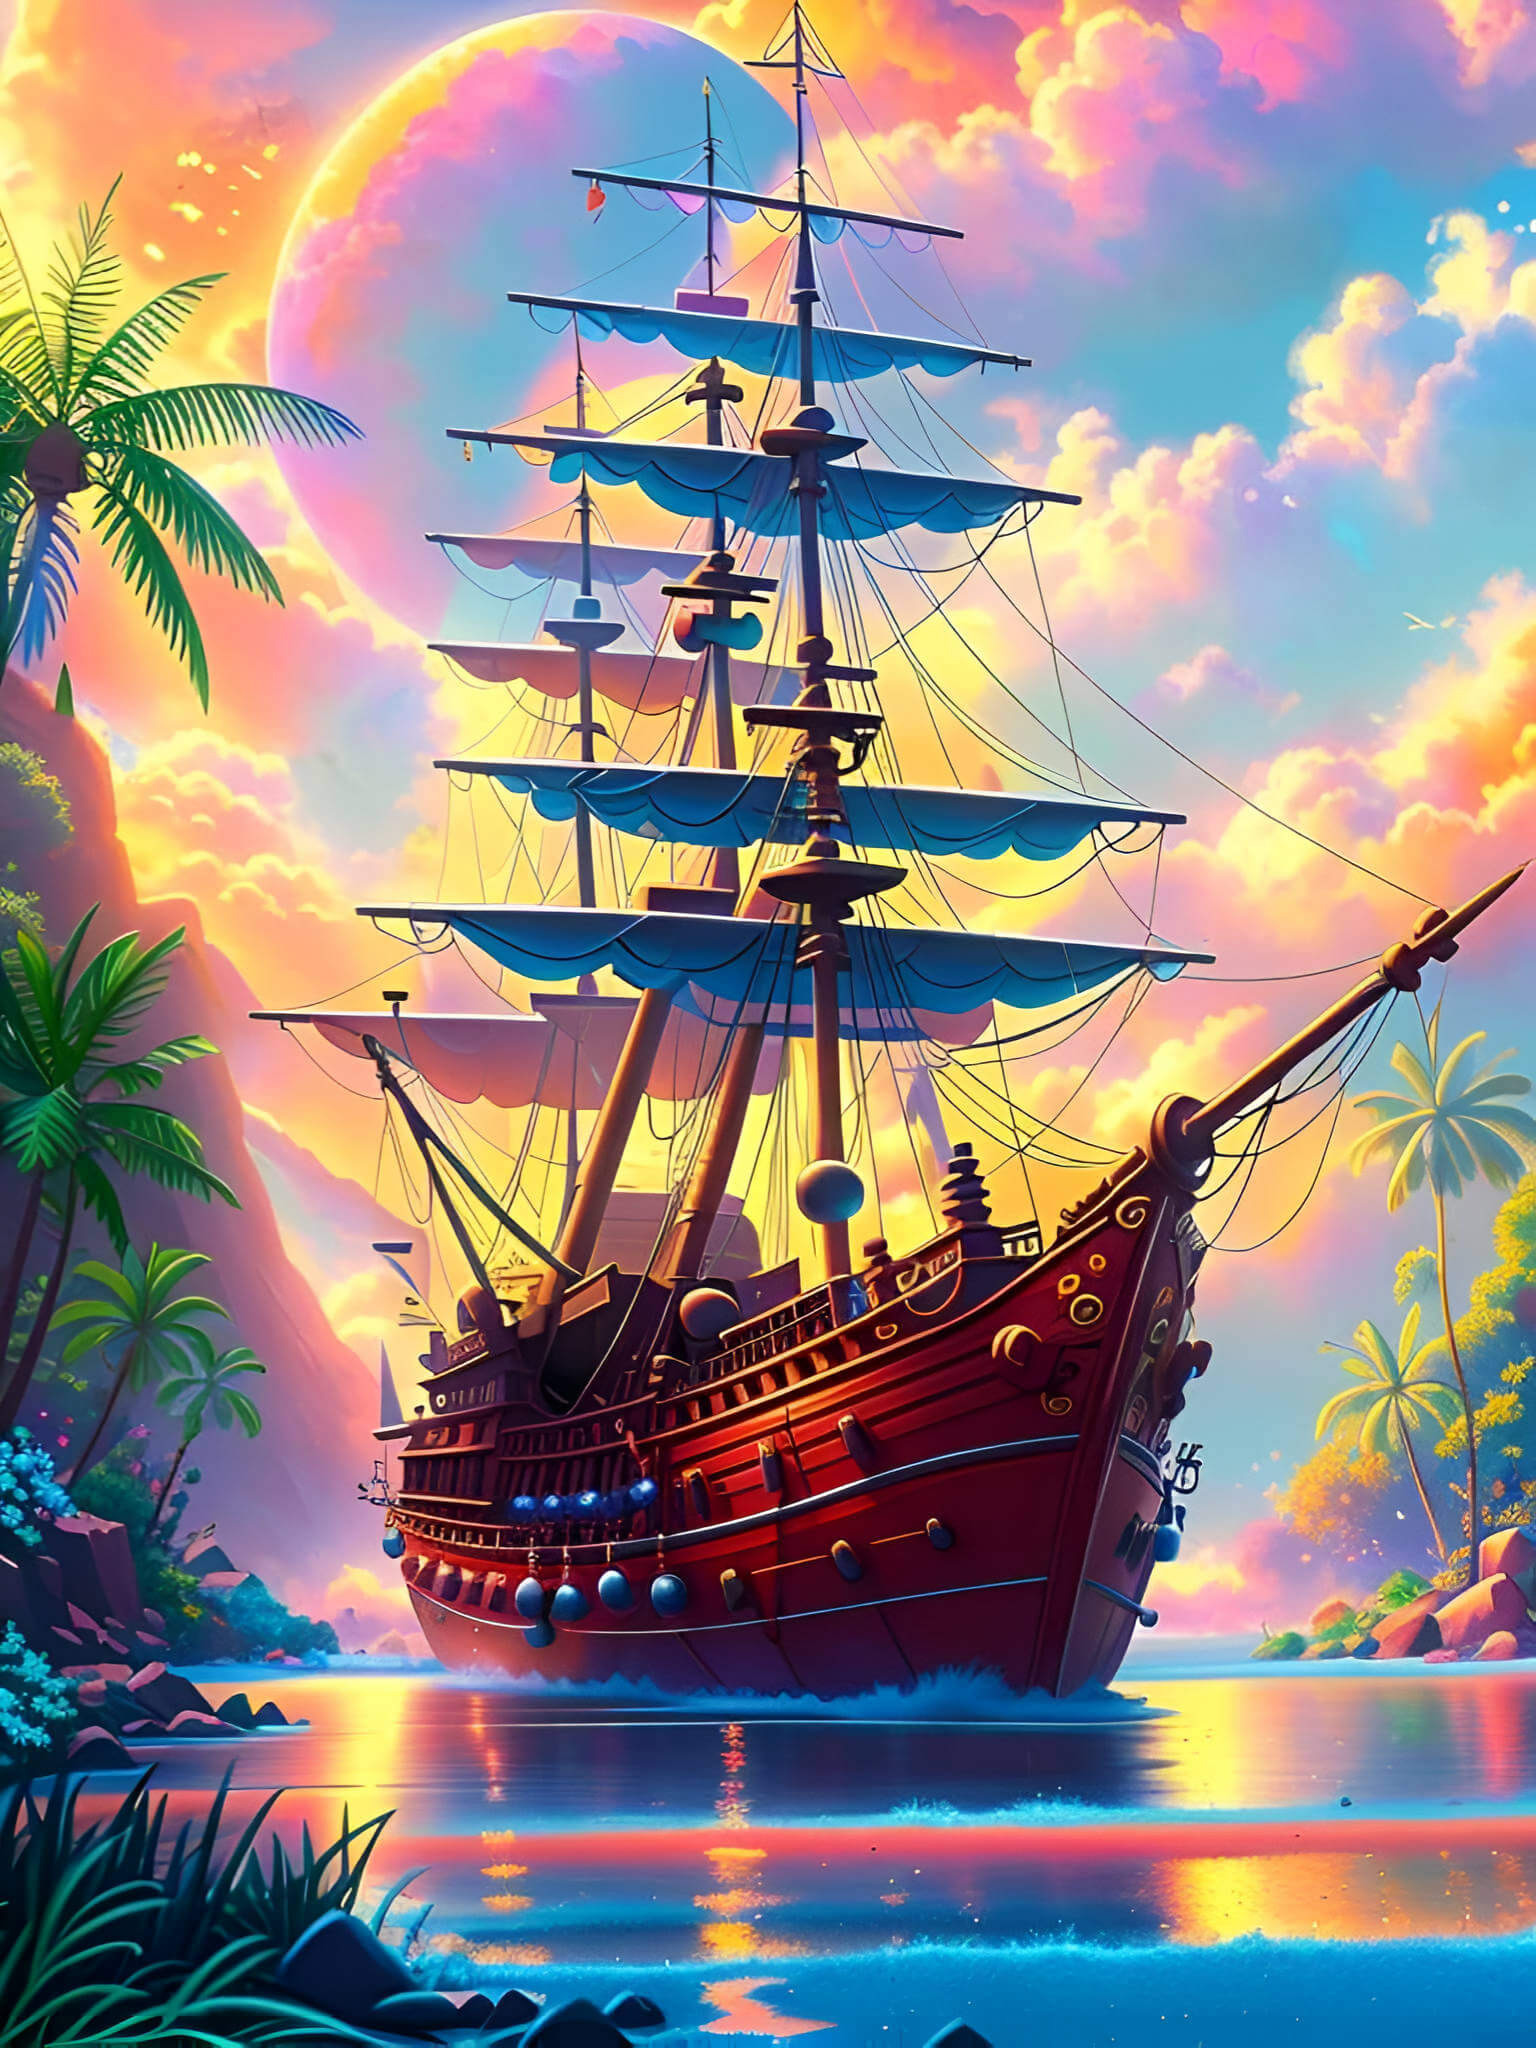 Stunning painting of an ancient ship created through AI